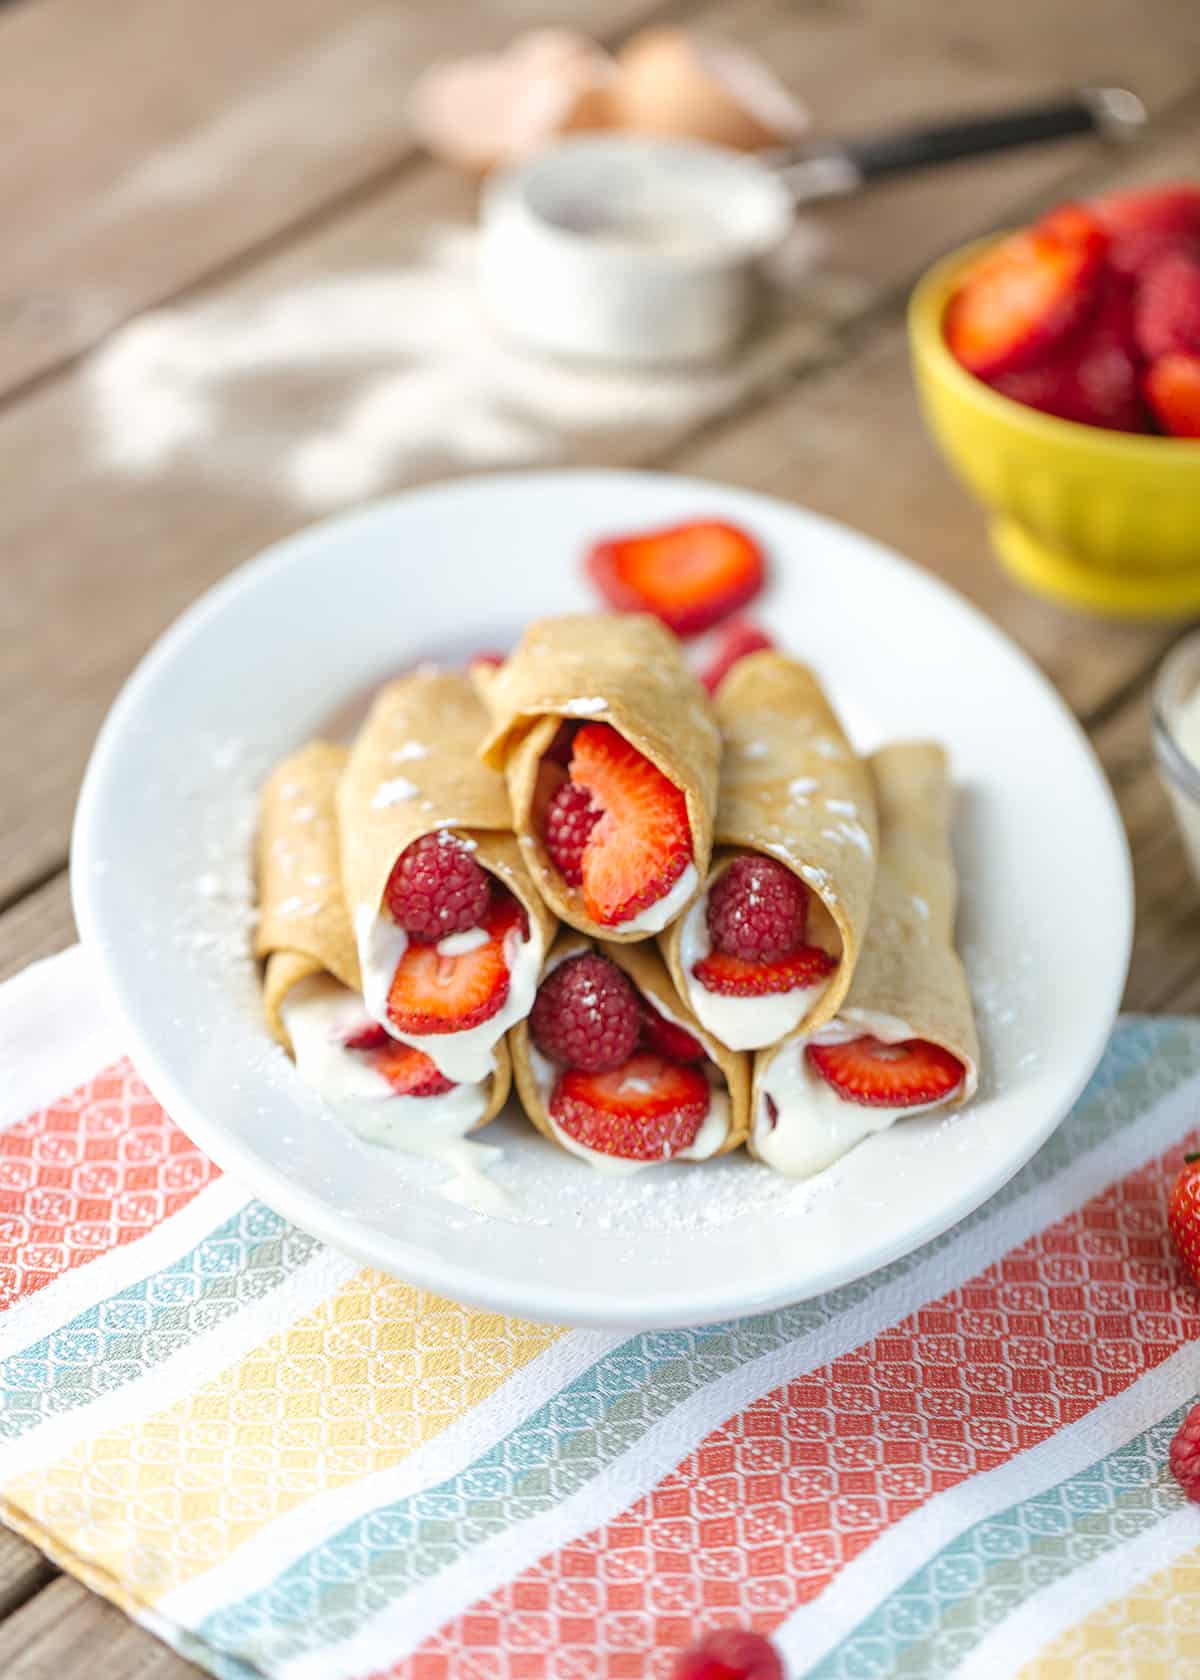 a plate of crepes filled with strawberries, raspberries and a cream filling on a white plate with a colorful napkin underneath